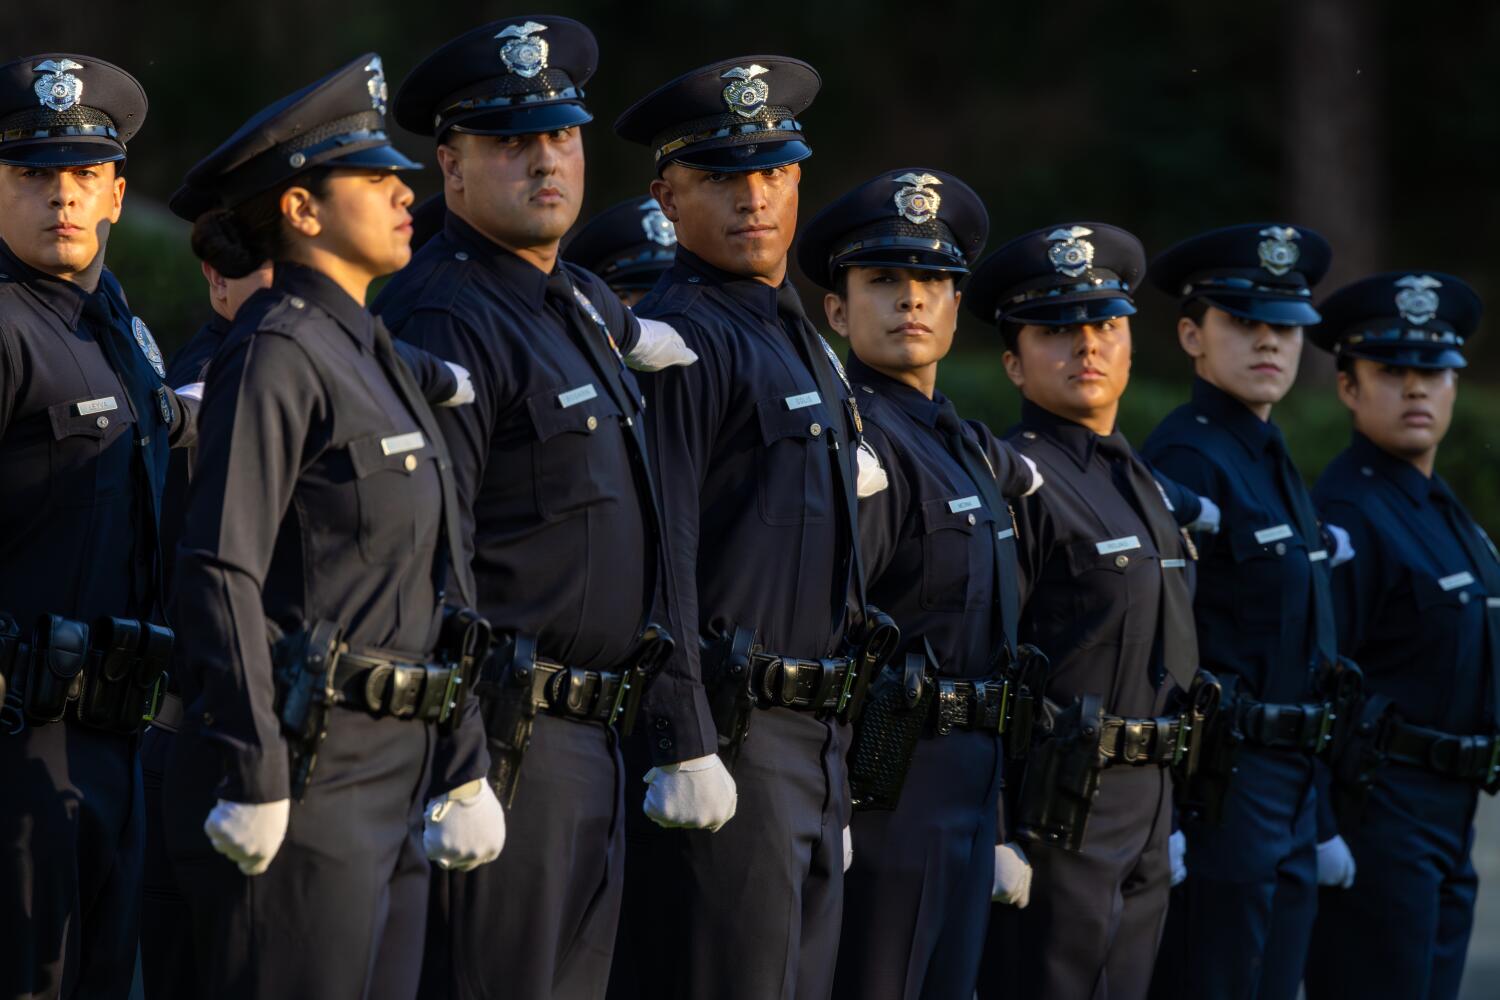 Image for display with article titled The LAPD Trains Foreign Police. Does That Enable Human Rights Violations?